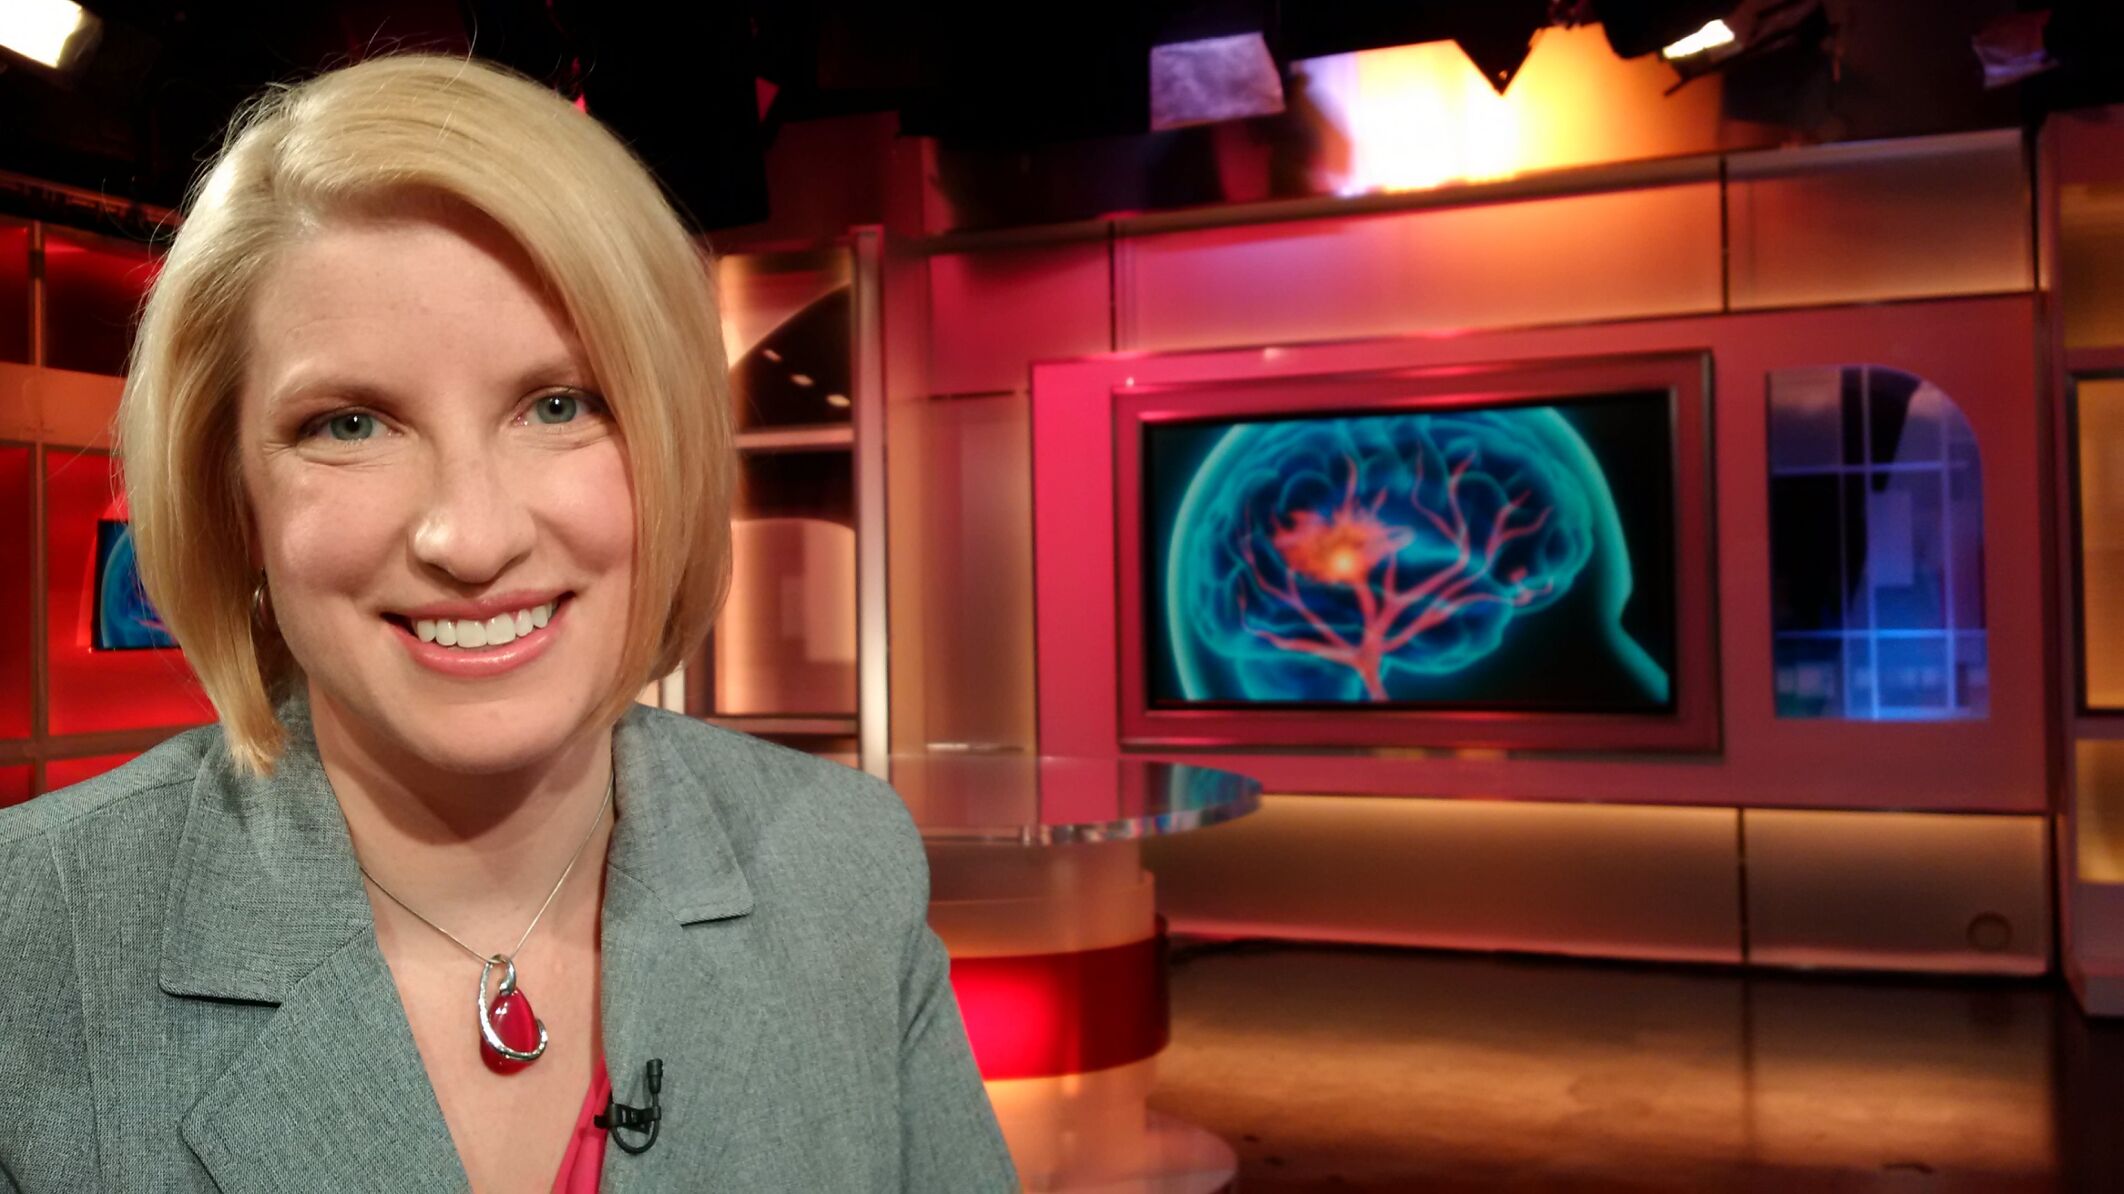 A female smiling at the camera on a filming set with a television showing an image of the brain during stroke